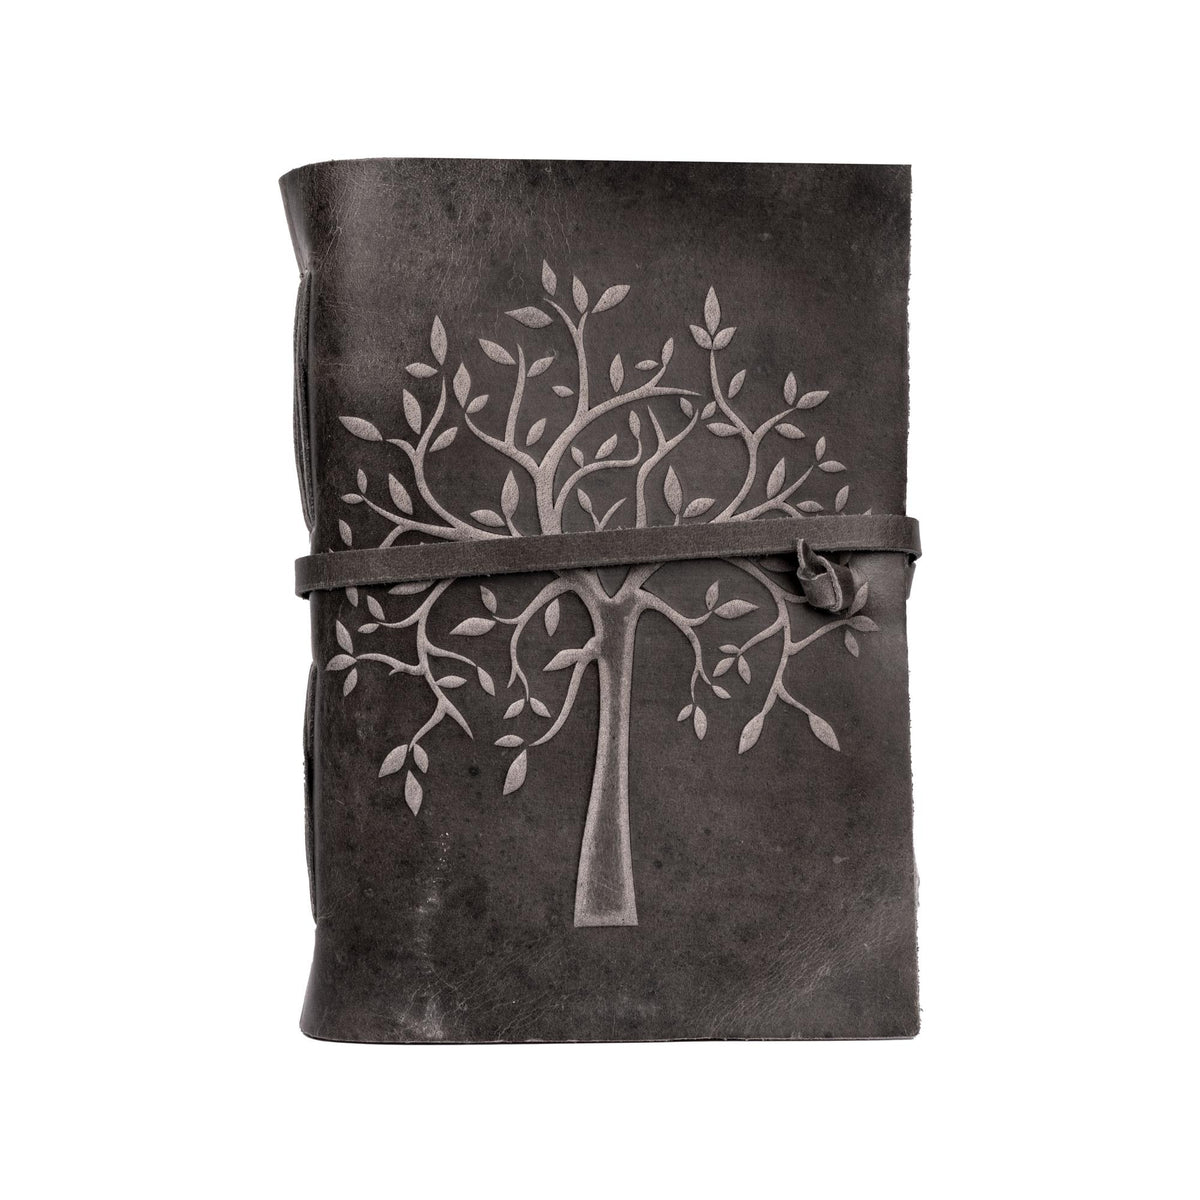 TREE OF LIFE JOURNAL - VINTAGE LEATHER JOURNAL